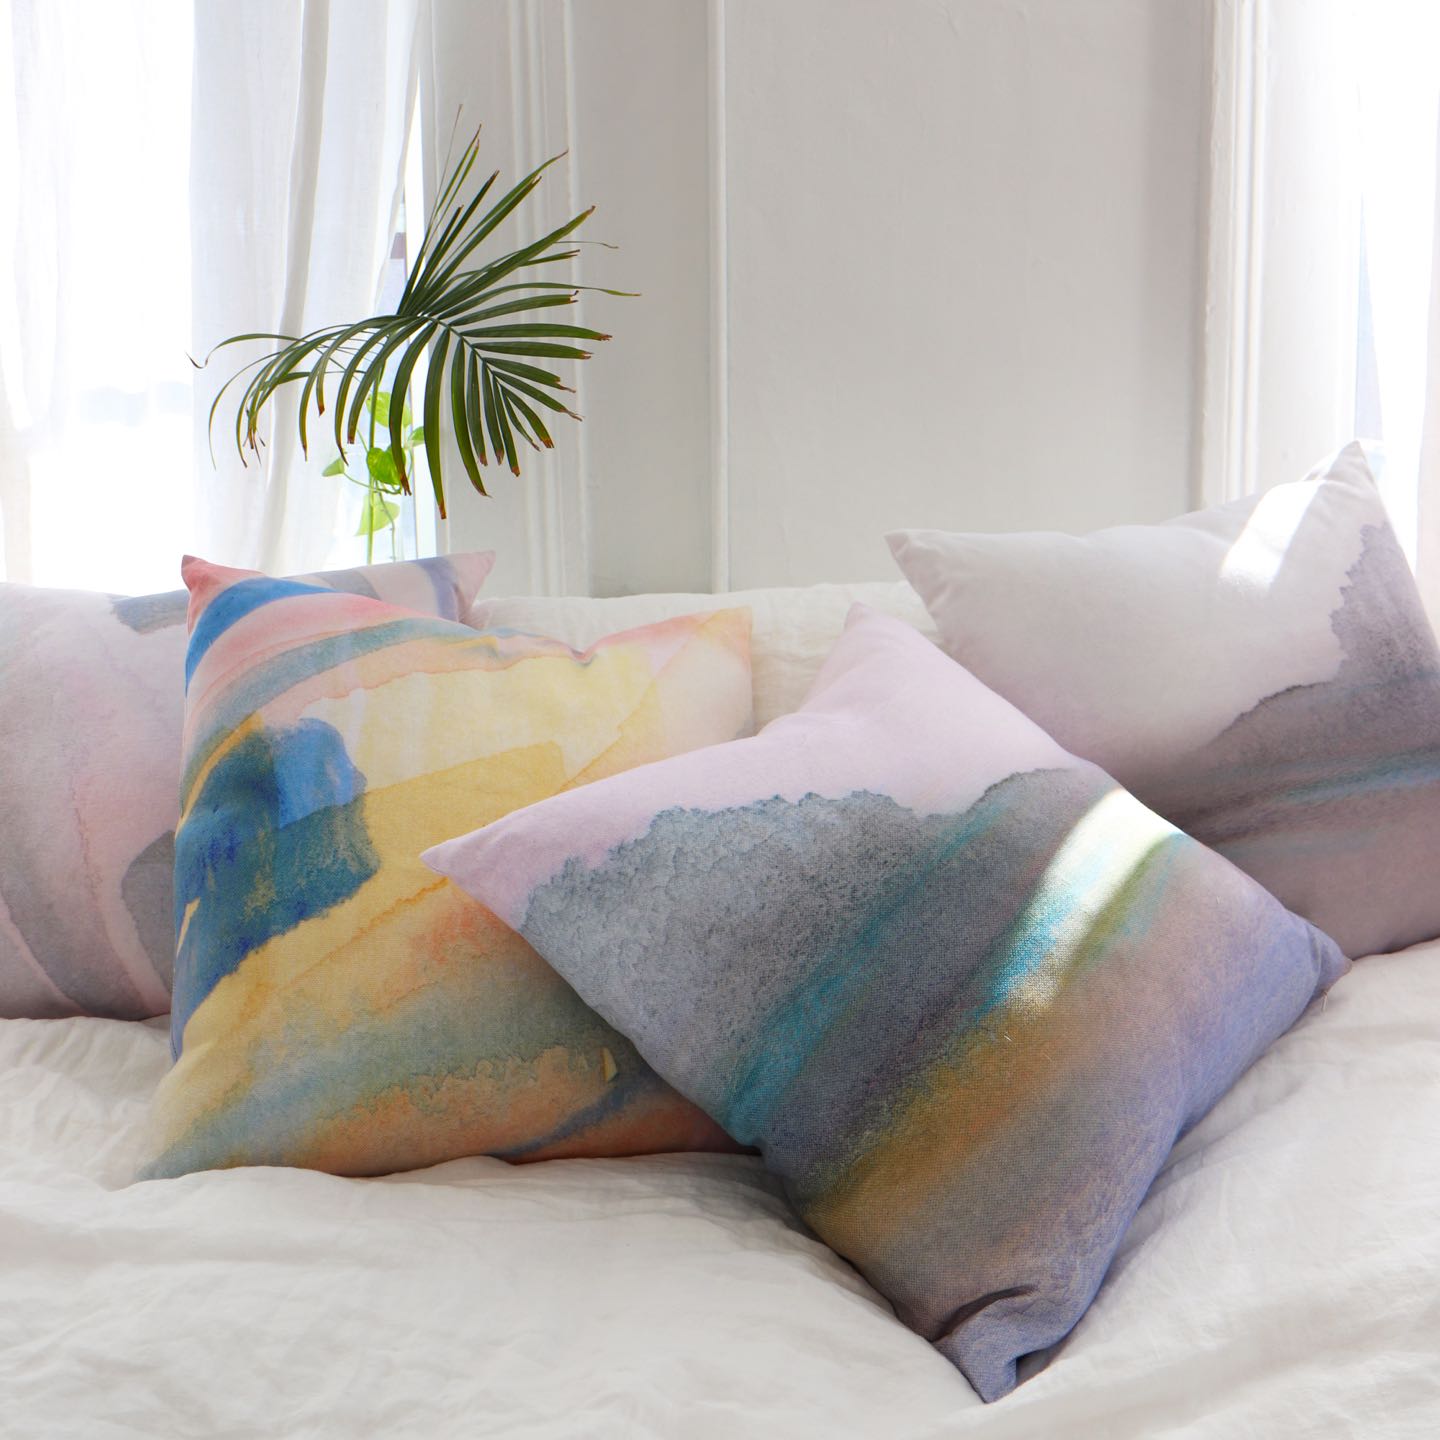 Three watercolor pillows on a bed in a room